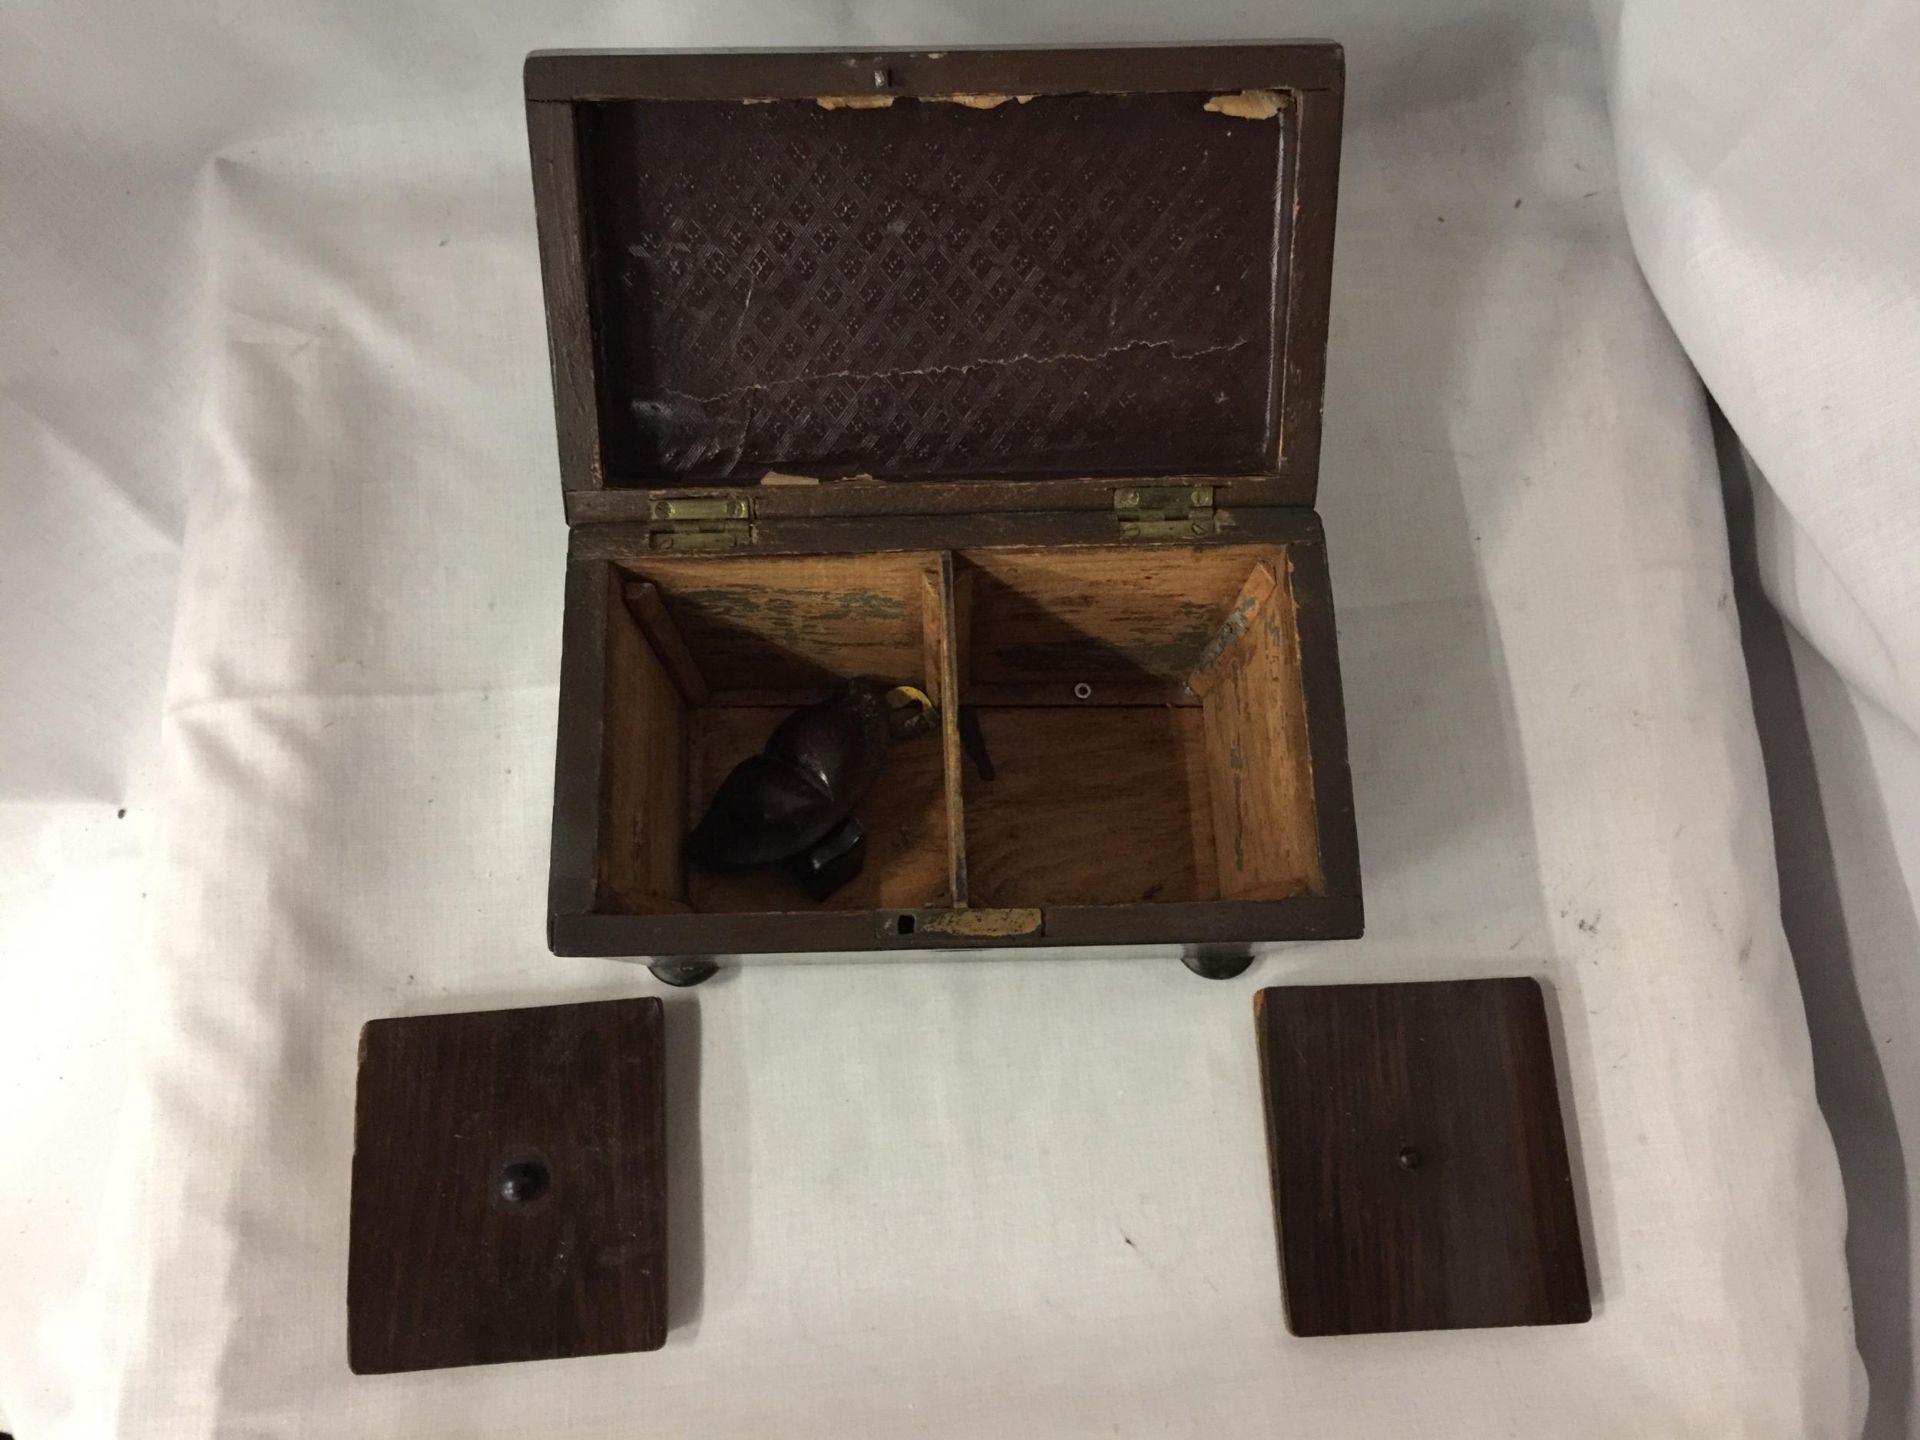 A VINTAGE HINGE LIDDED WOODEN CIGARETTE/ TOBACCO BOX WITH TWO INNER LIDDED SECTIONAL COMPARTMENTS, - Image 3 of 4